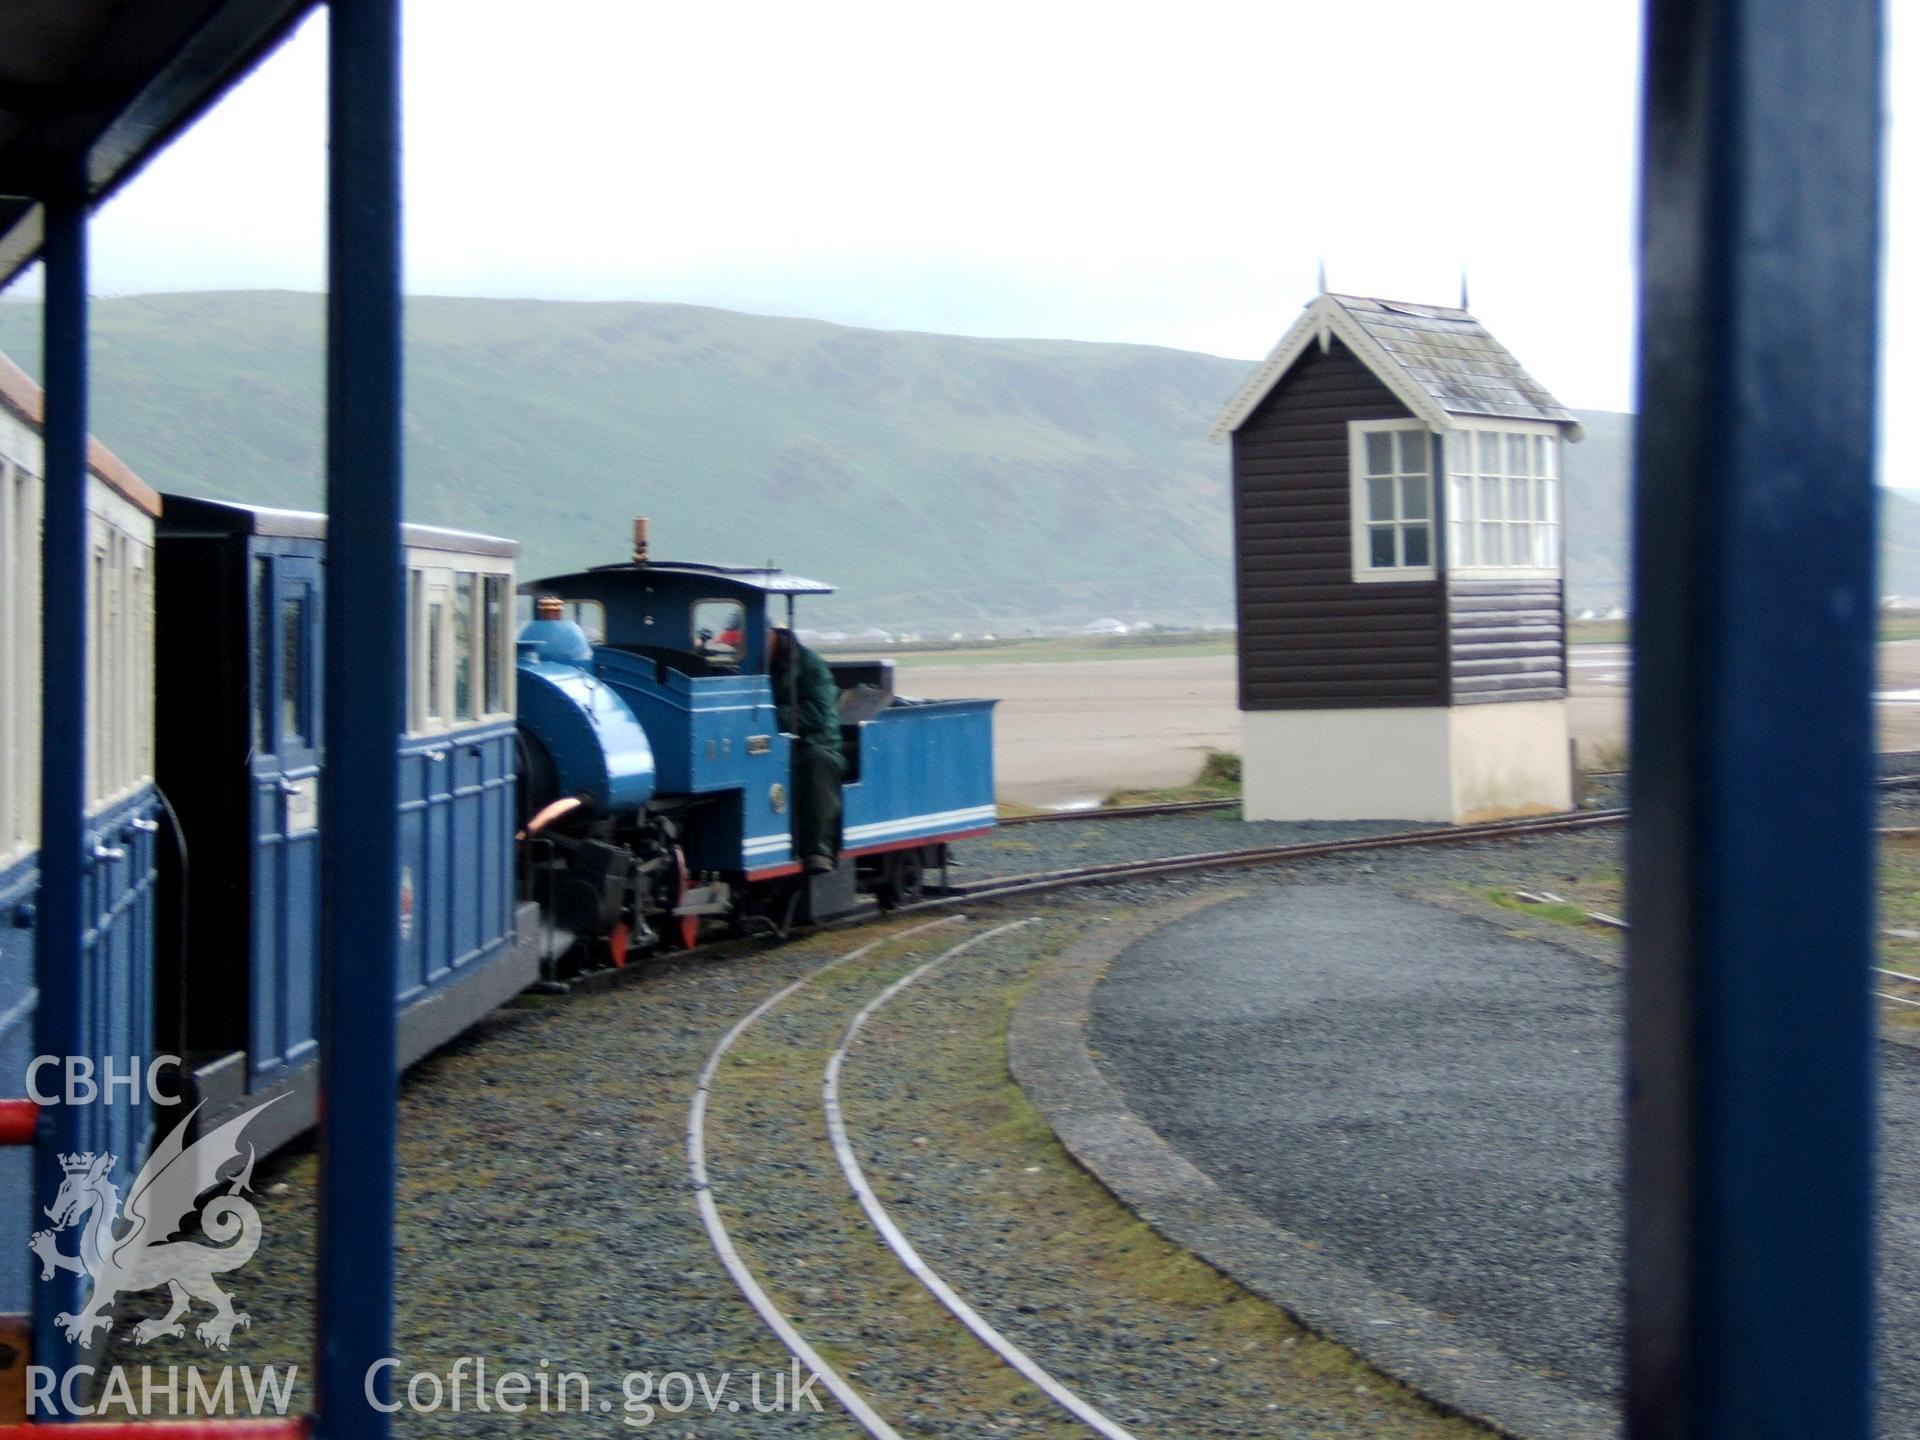 'Sherpa' on train, with Ferry Station cabin, looking east.